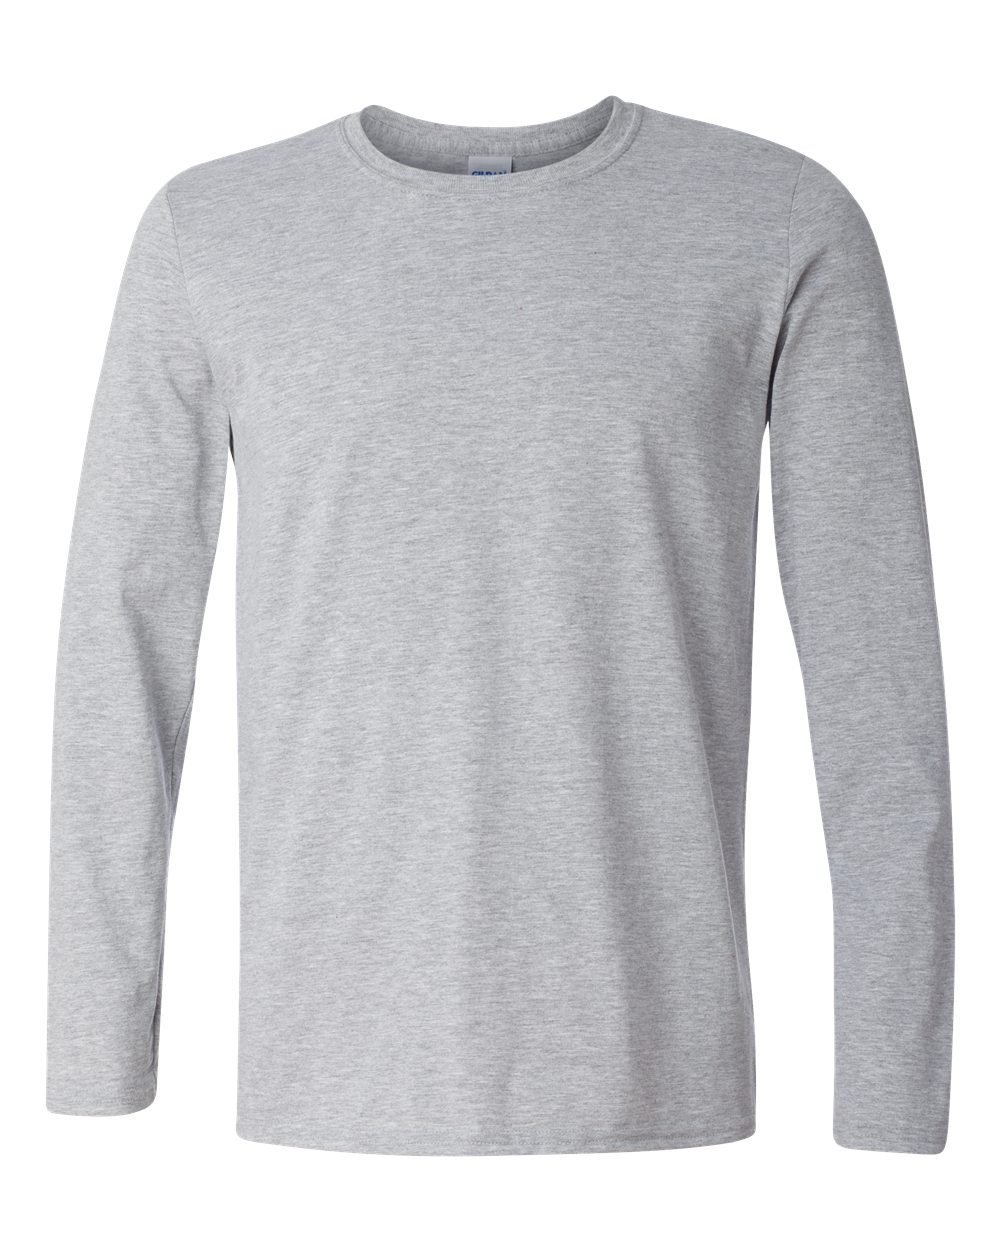 Gildan® - Softstyle Long Sleeve T-Shirt - 64400, Exceptional 100%  Ring-Spun Cotton, 4.5 oz. (US) , 30 Singles, Unleash the power of comfort  and style with our Gildan Soft-style Long Sleeve T-Shirt